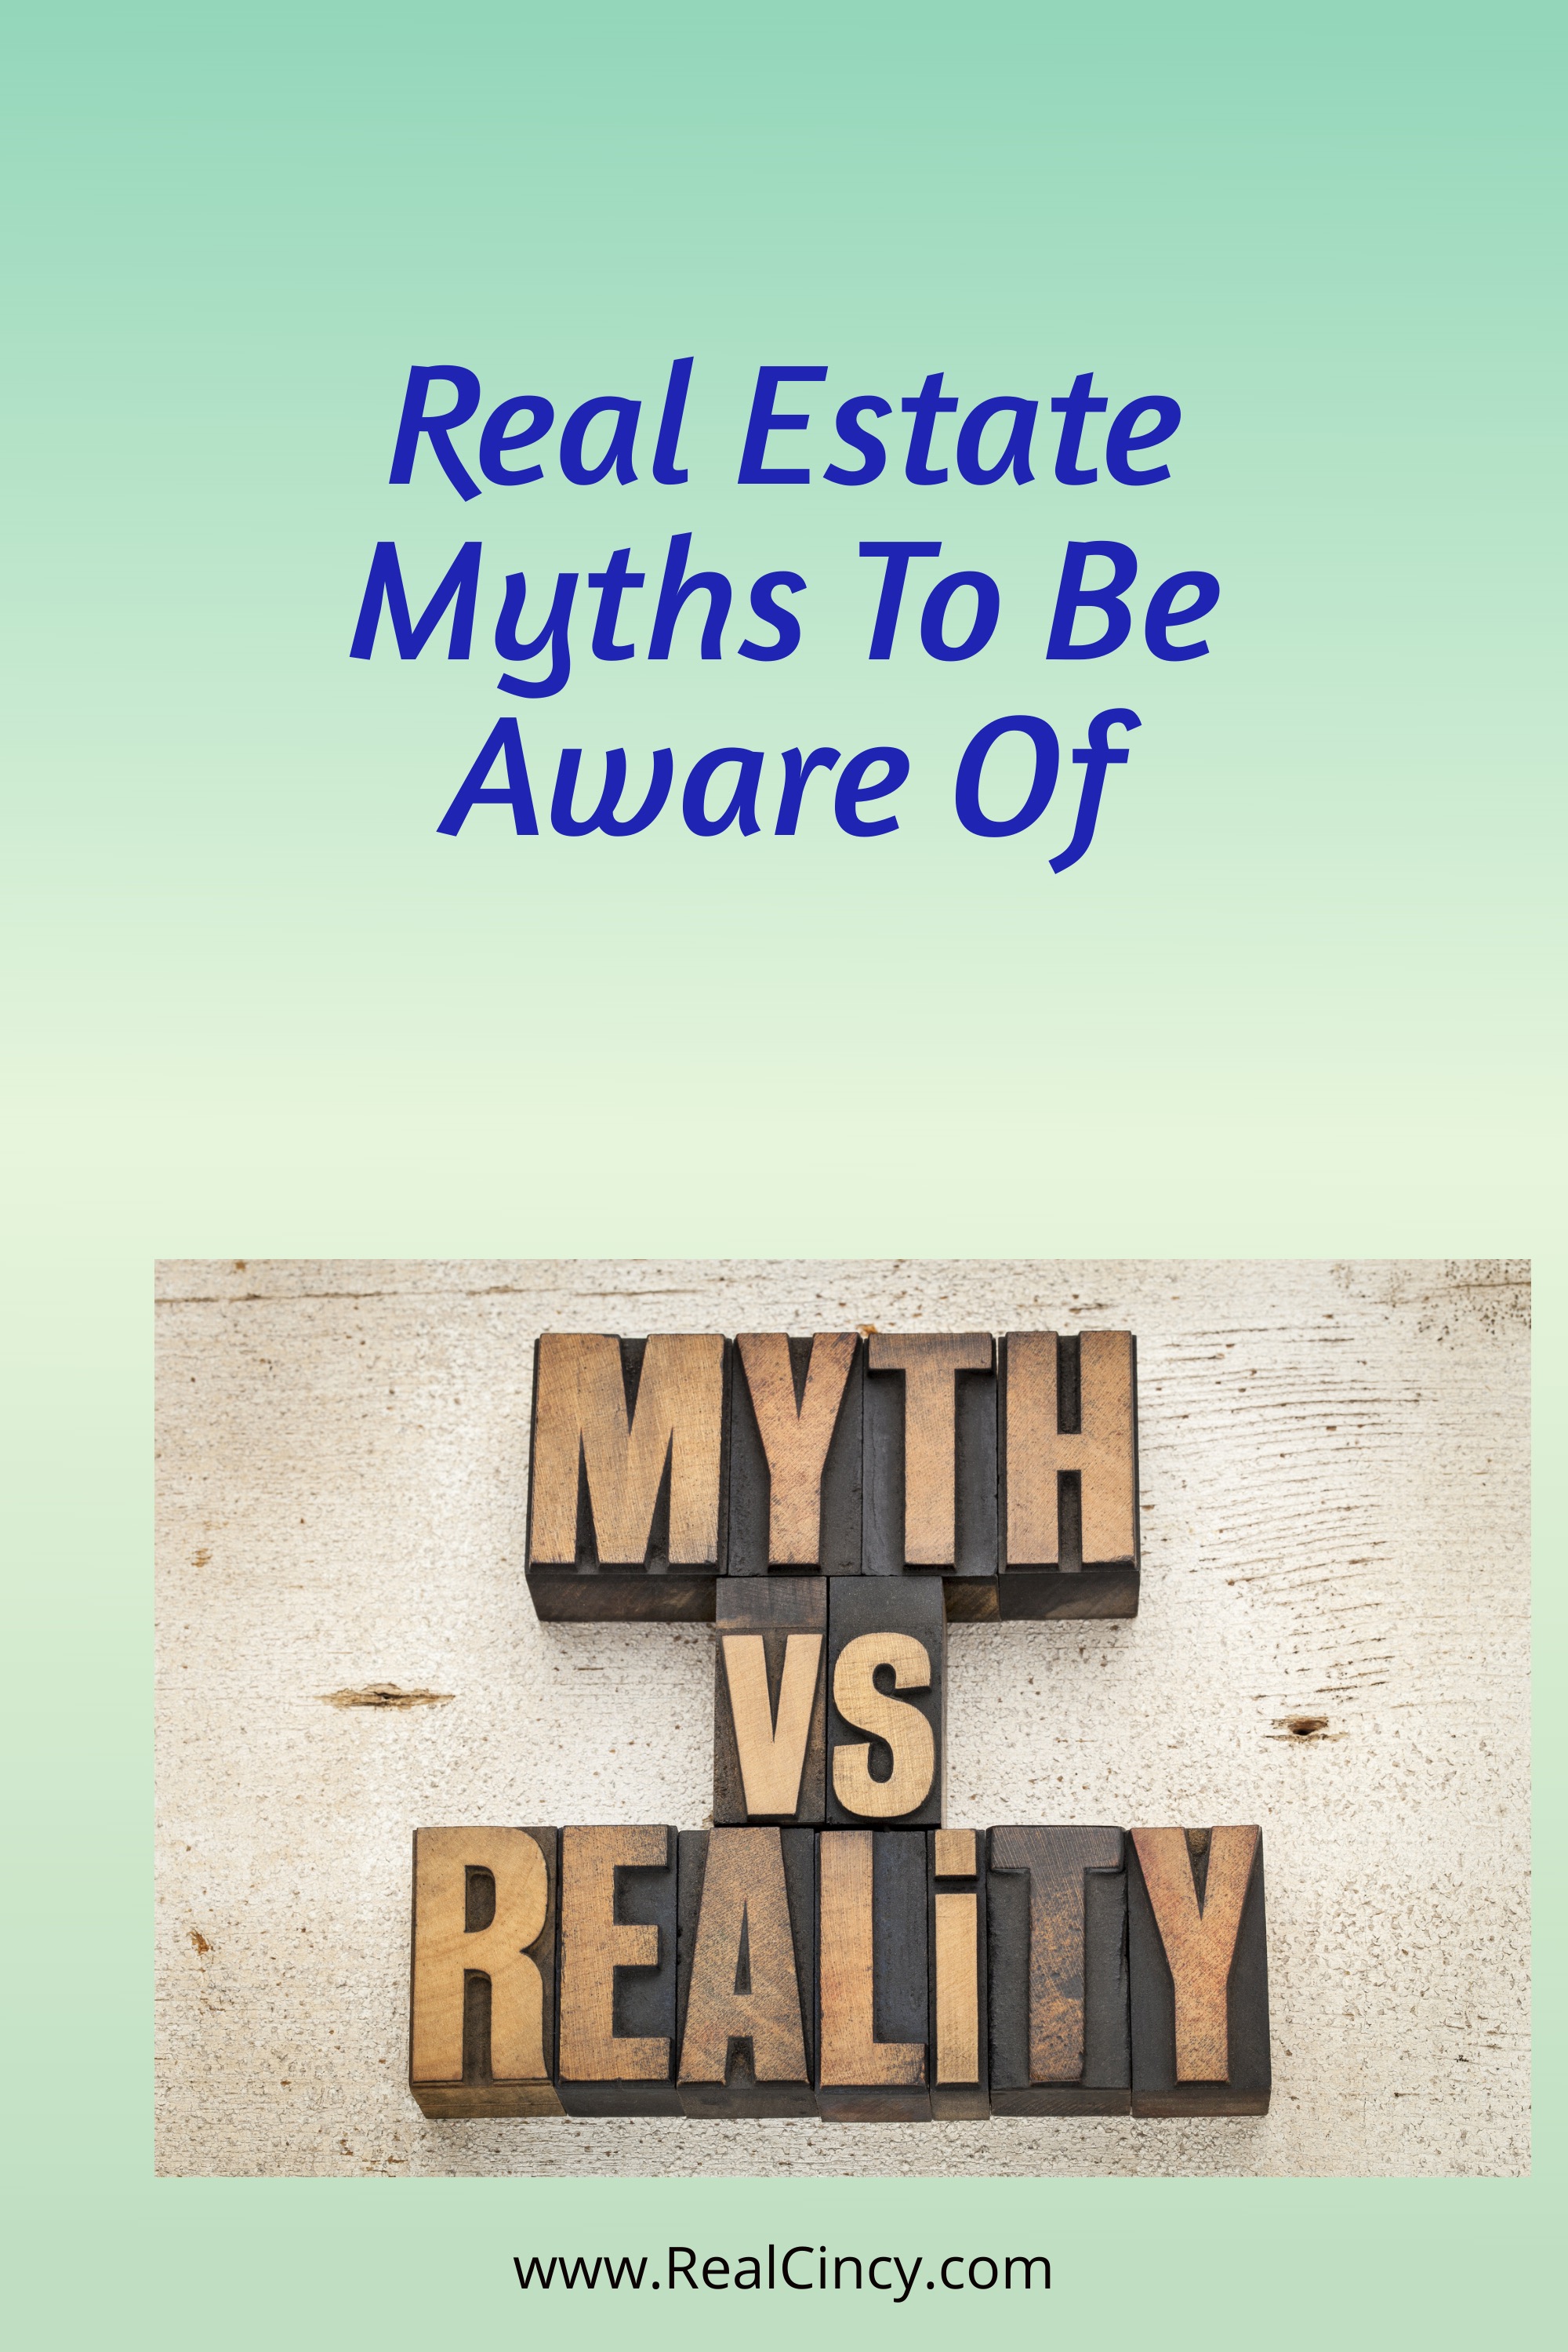 Common Real Estate Myths for pinning